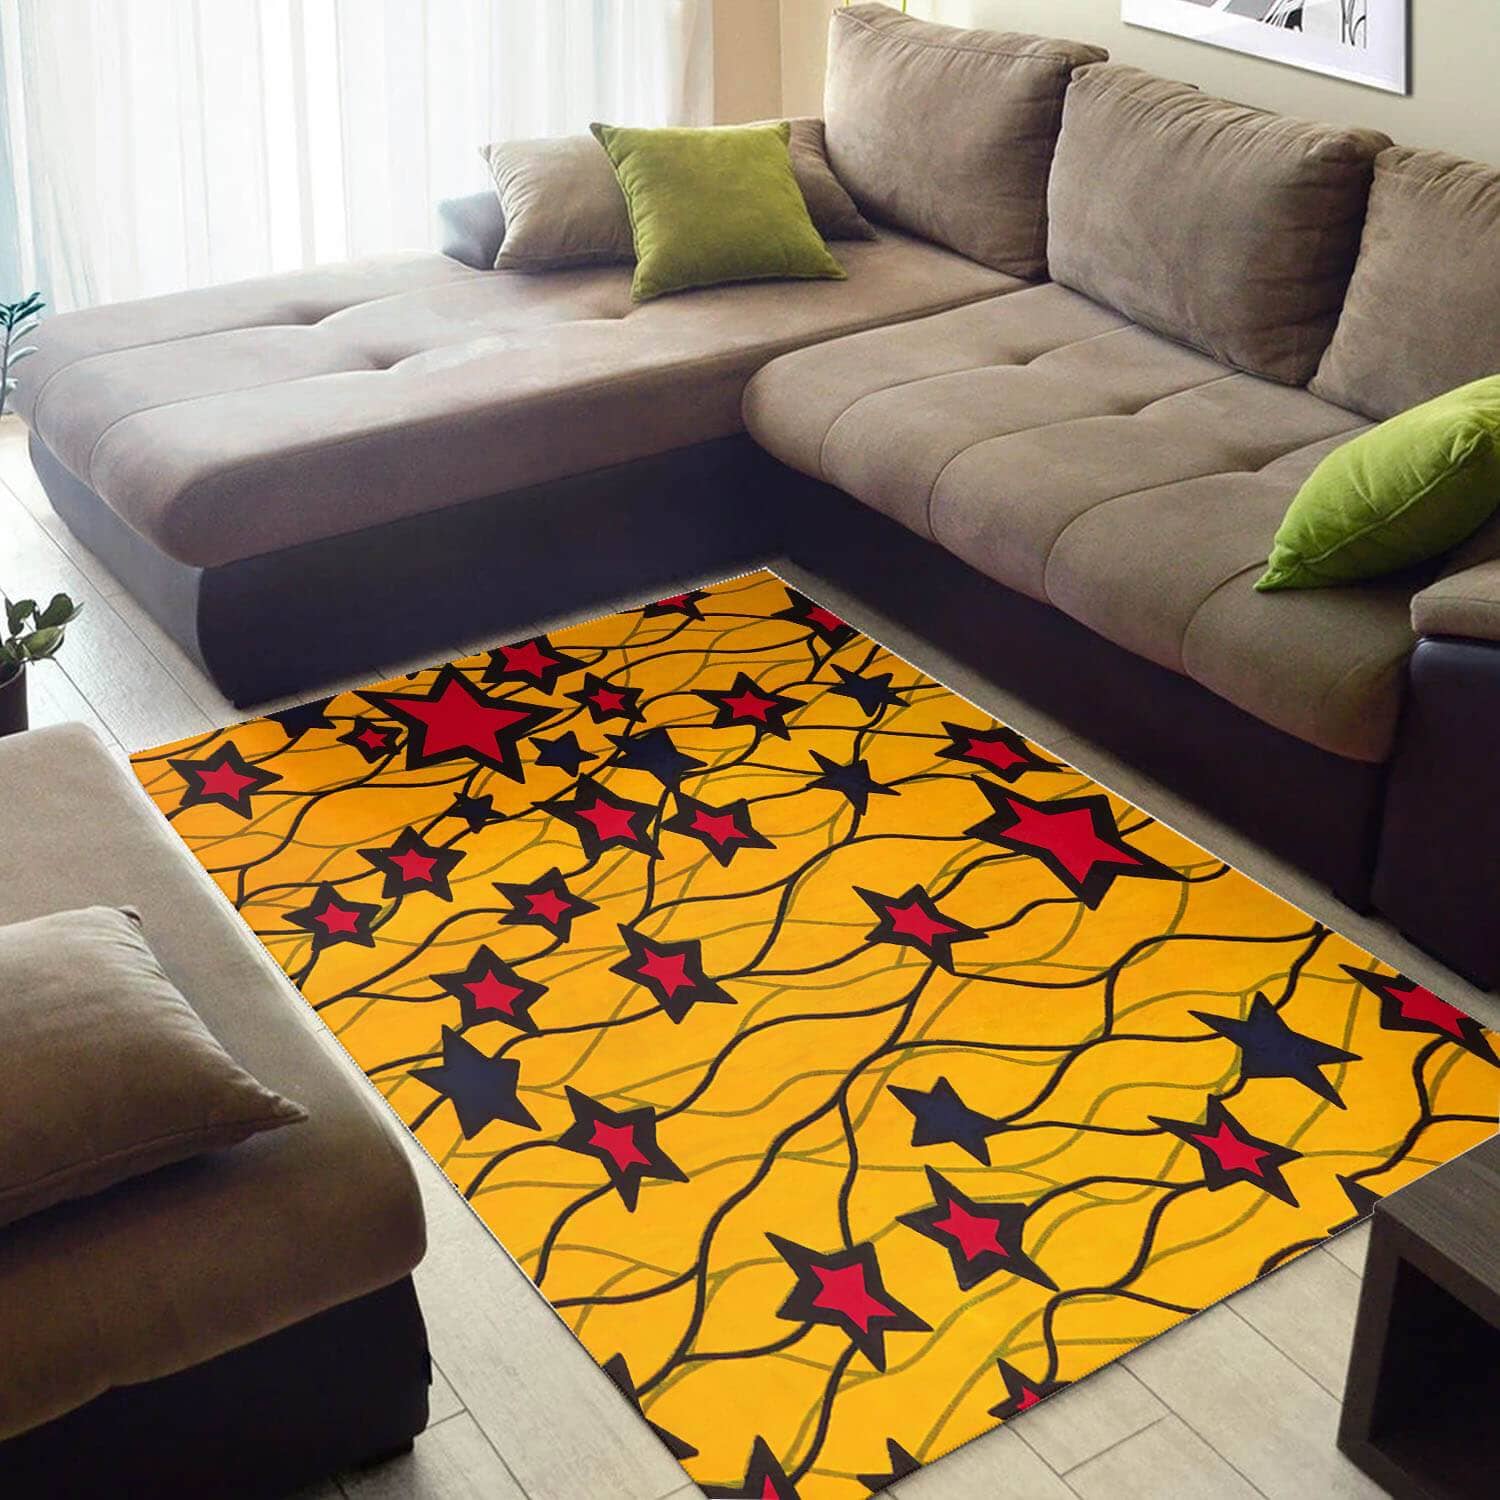 Cool African Vintage Black History Month Seamless Pattern Style Floor Inspired Home Rug